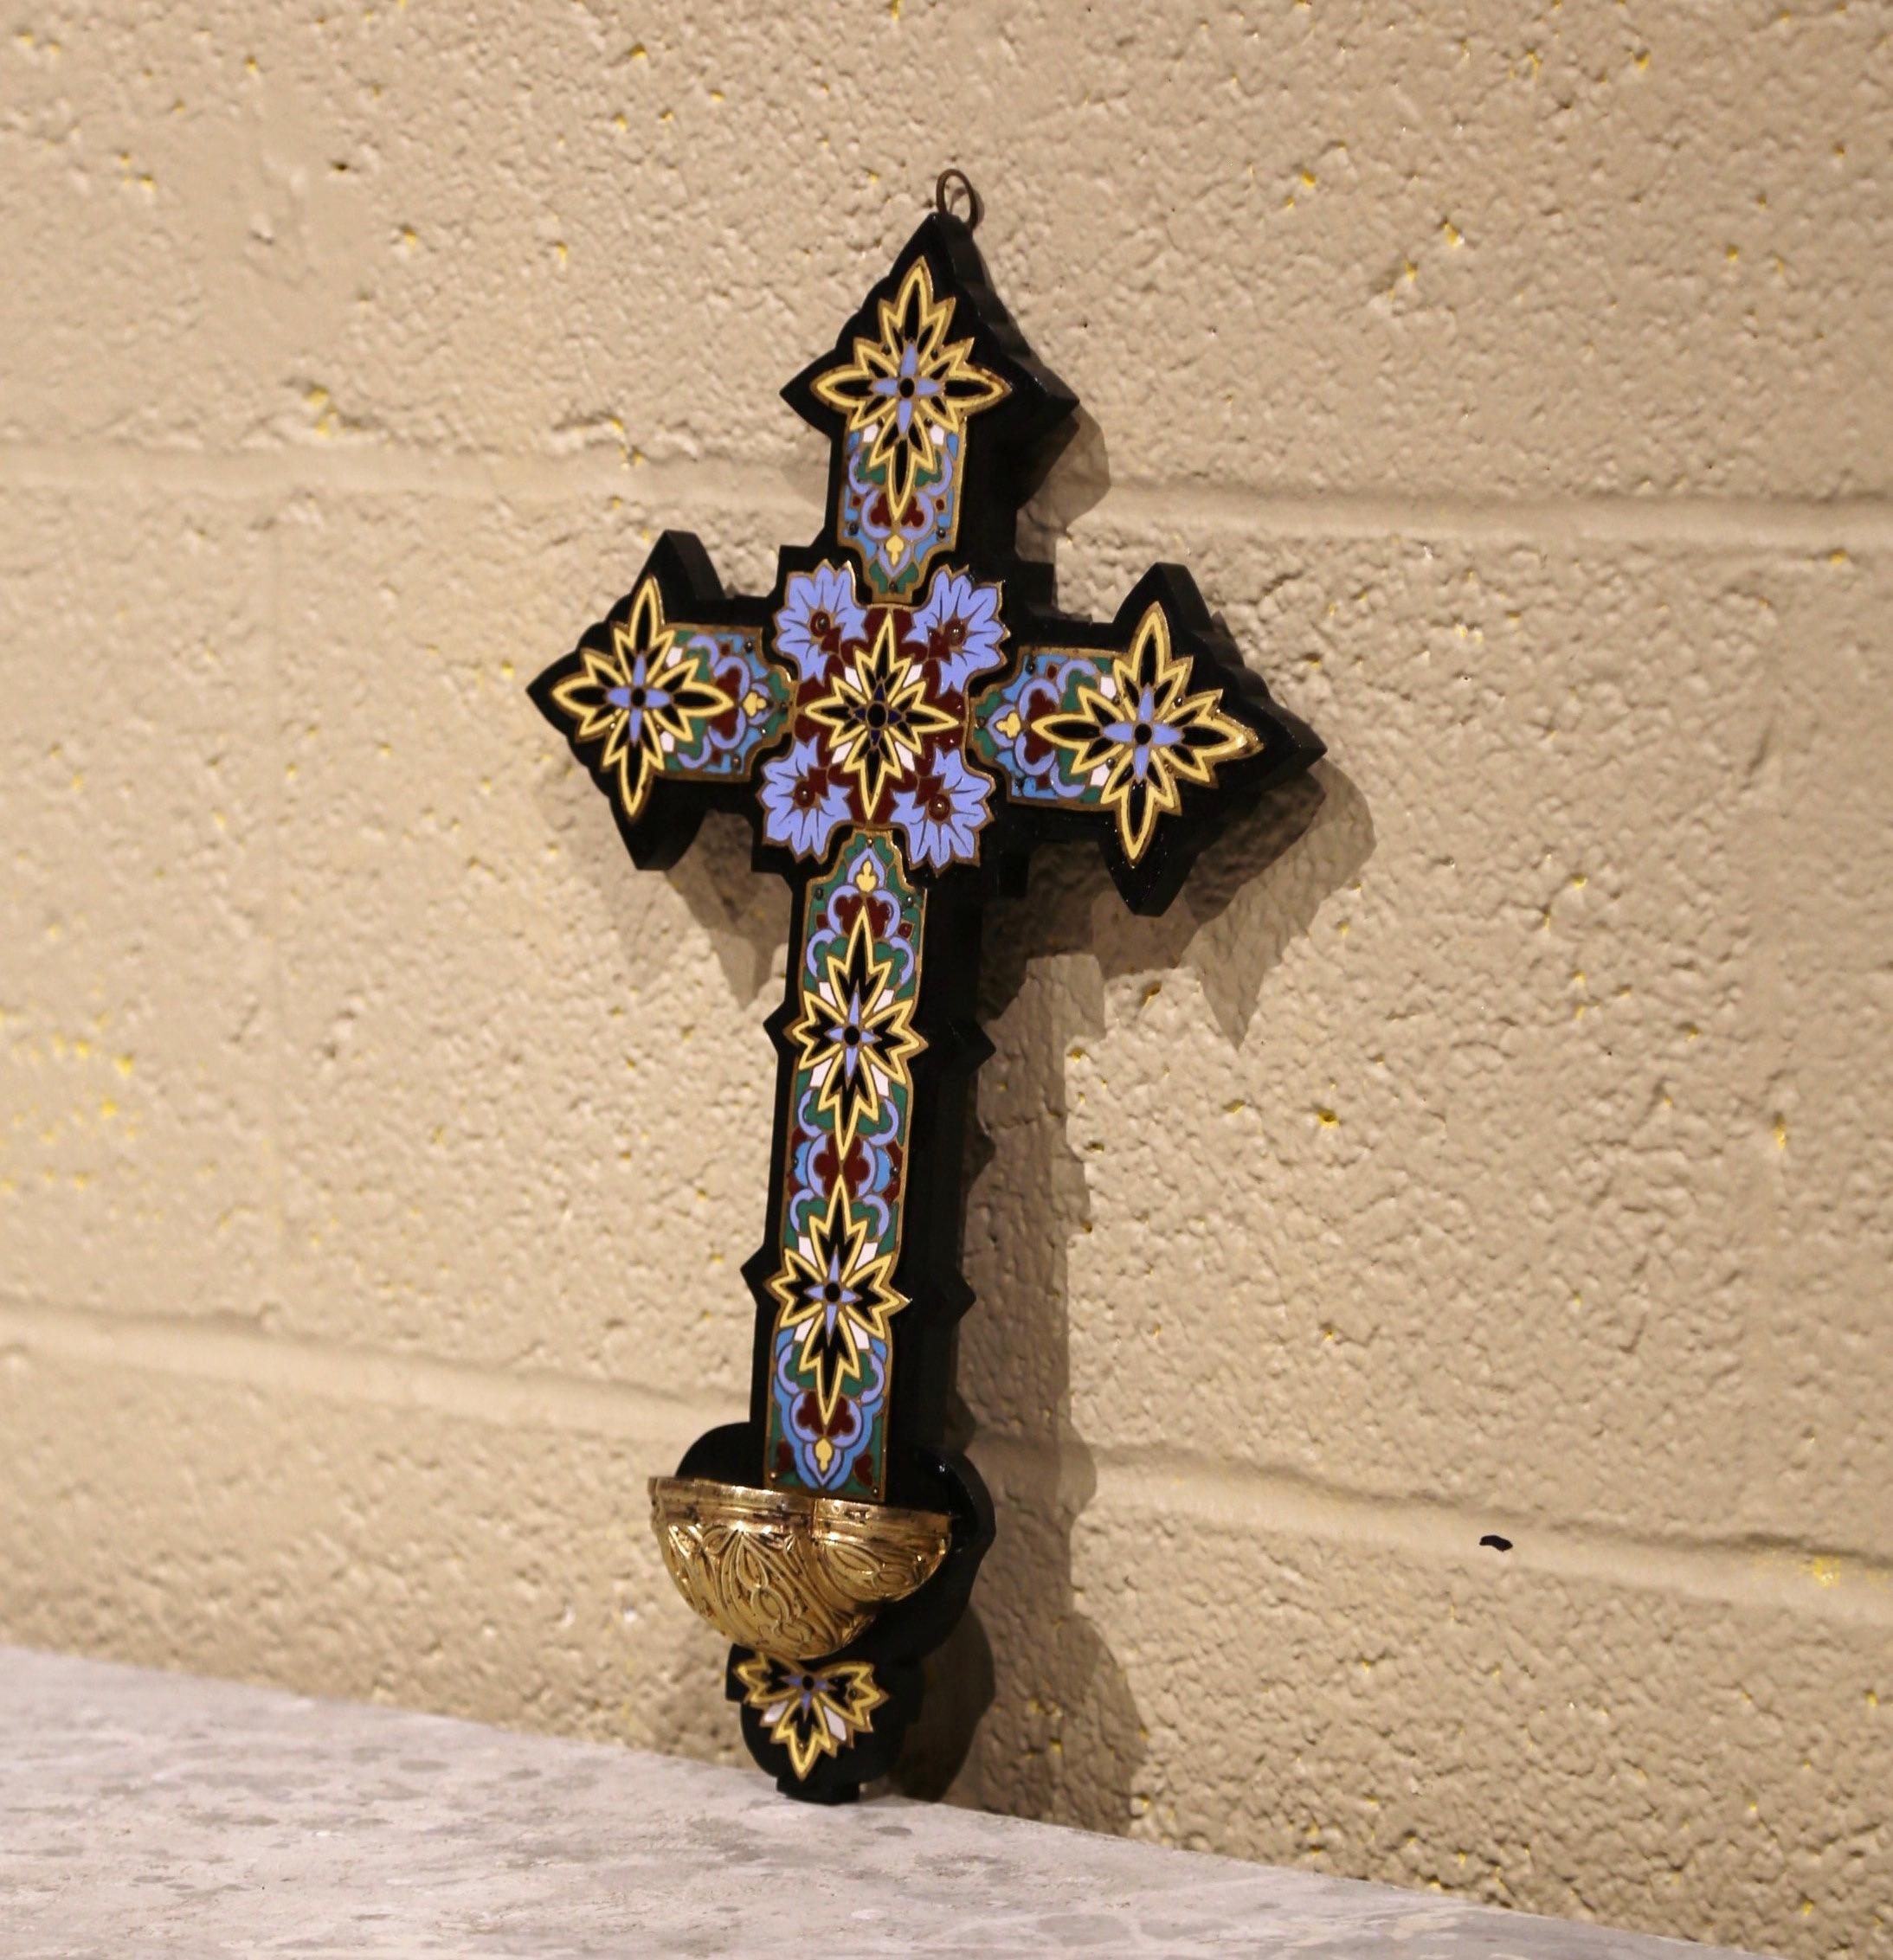 This colorful cross with holy water font recipient was created in France, circa 1880. The large antique cross mounted on a wood plaque, features beautiful, intricate cloisonné work with enamel, stone and bronze star decor throughout. The religious